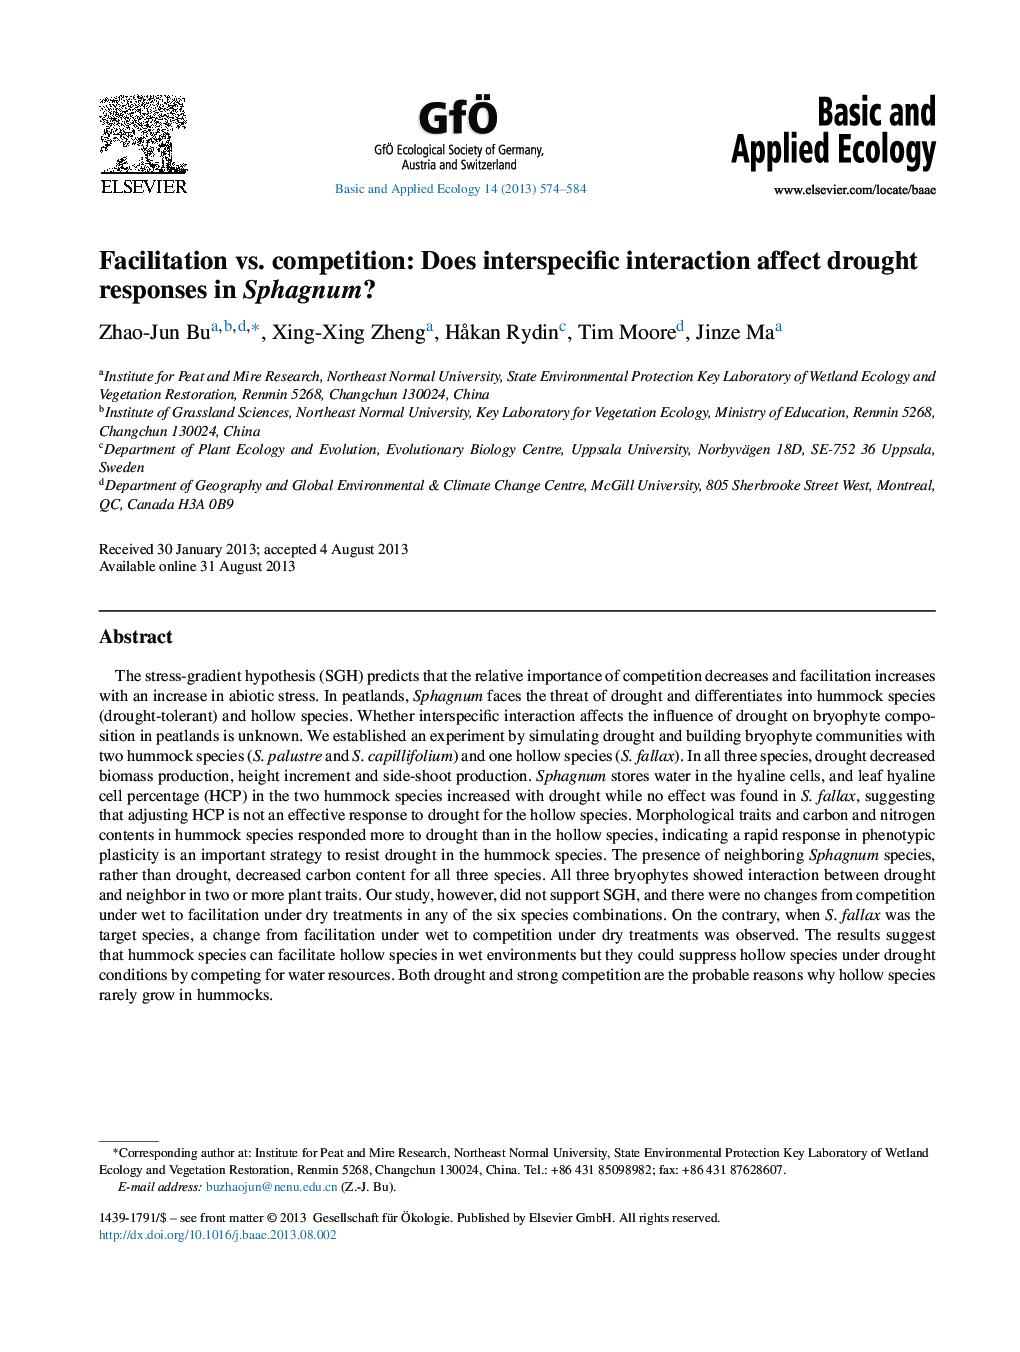 Facilitation vs. competition: Does interspecific interaction affect drought responses in Sphagnum?